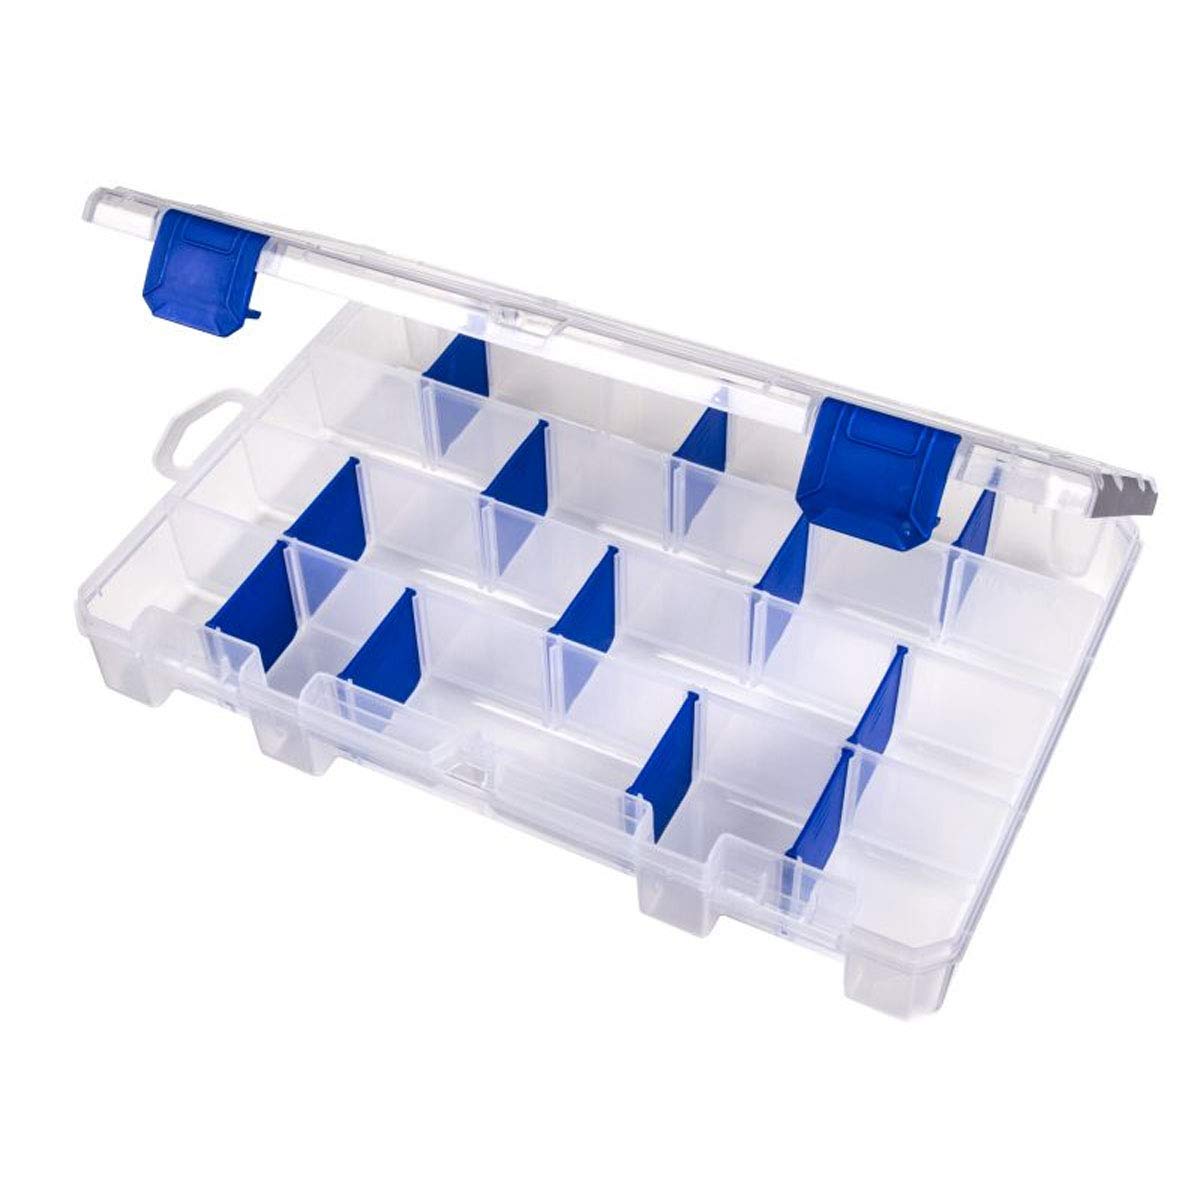 Flambeau Outdoors 4007 Tuff Tainer, Fishing Tackle Tray Box, Includes [12] Zerust Dividers, 24 Compartments- $4.84